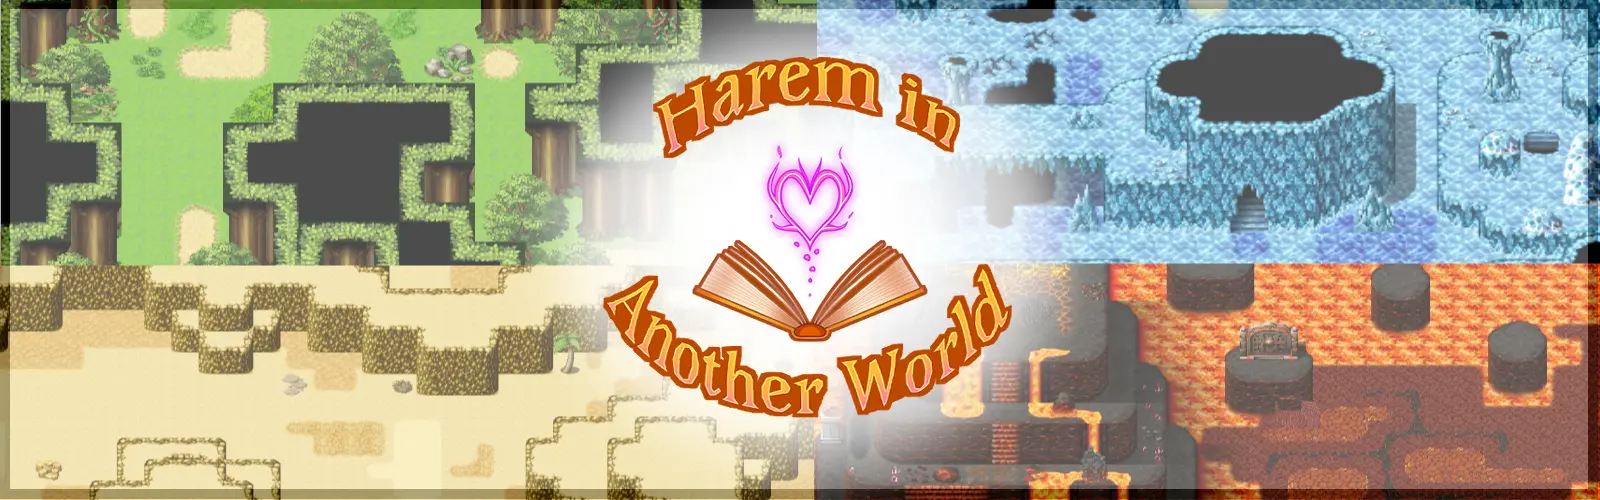 Harem in Another World main image